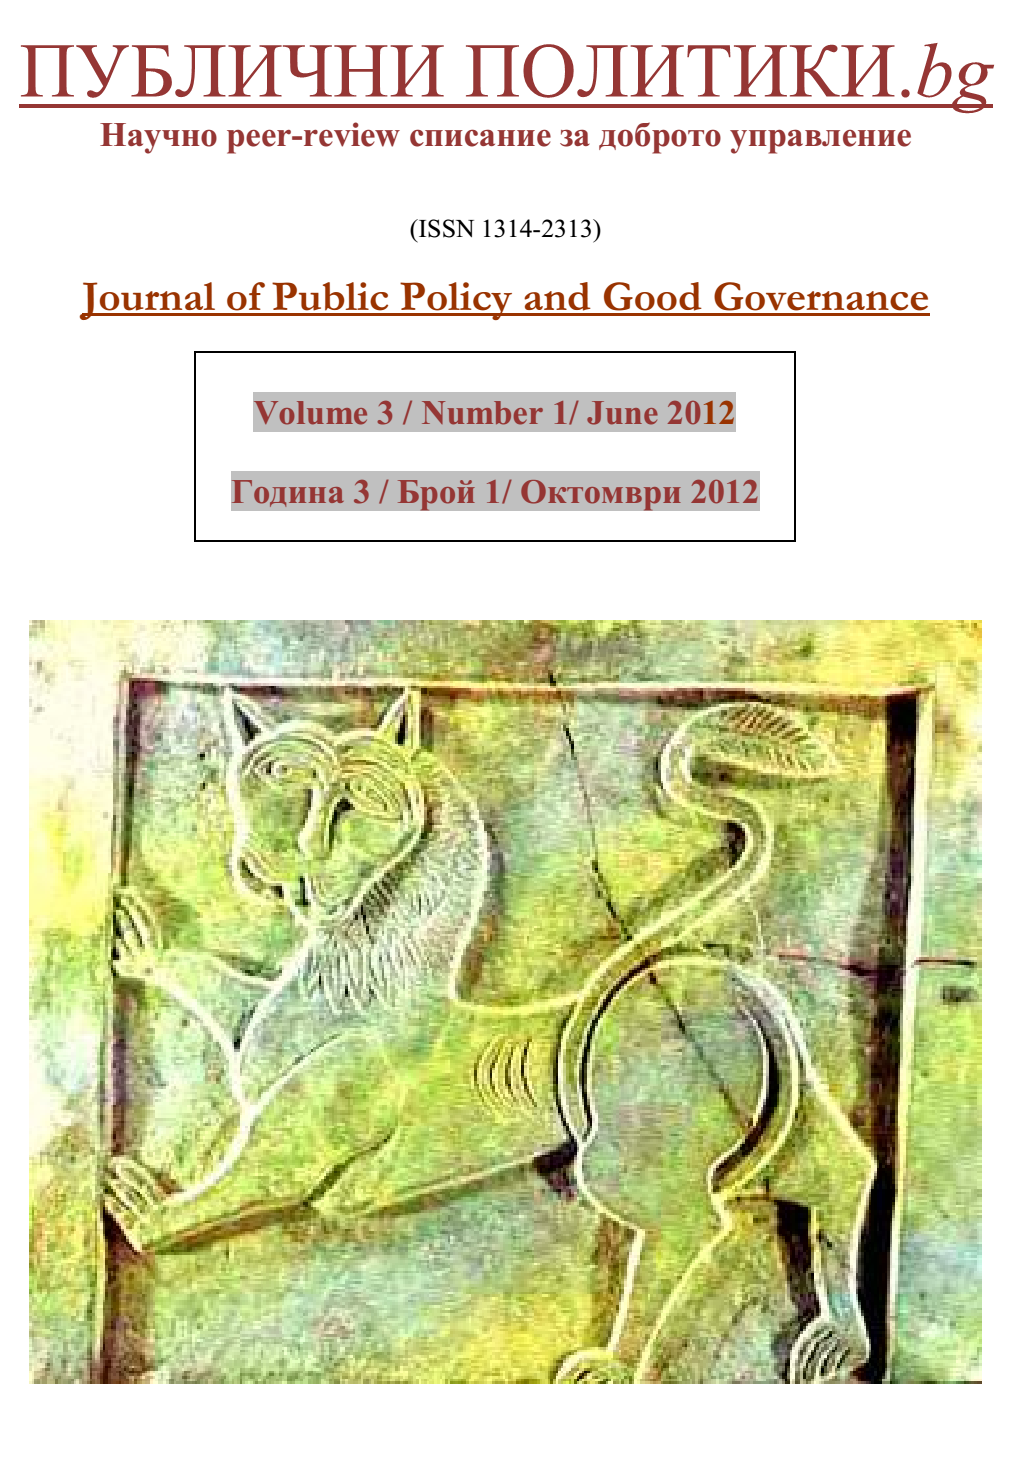 POLICY IMPLEMENTATION CAPACITY: REFORMS' TRENDS IN COMPARATIVE PERSPECTIVE